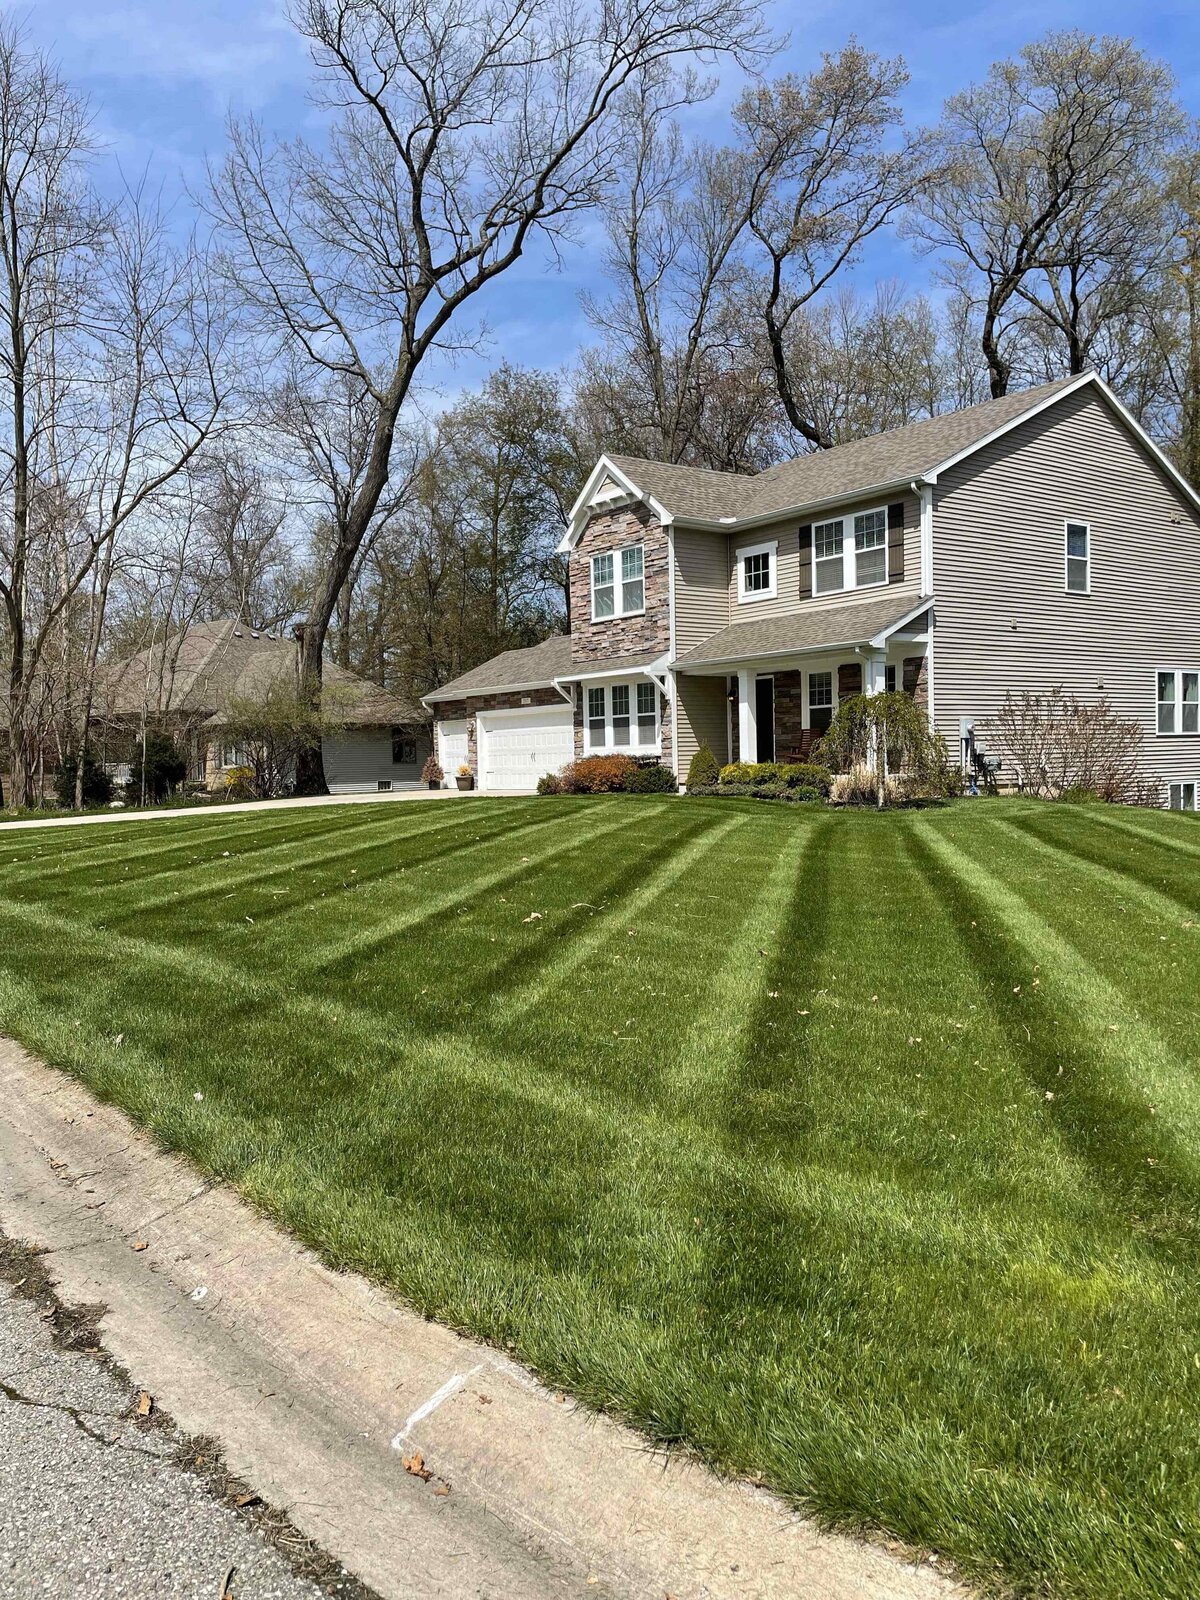 et-landscaping-mowing-work-residential-lawn-care